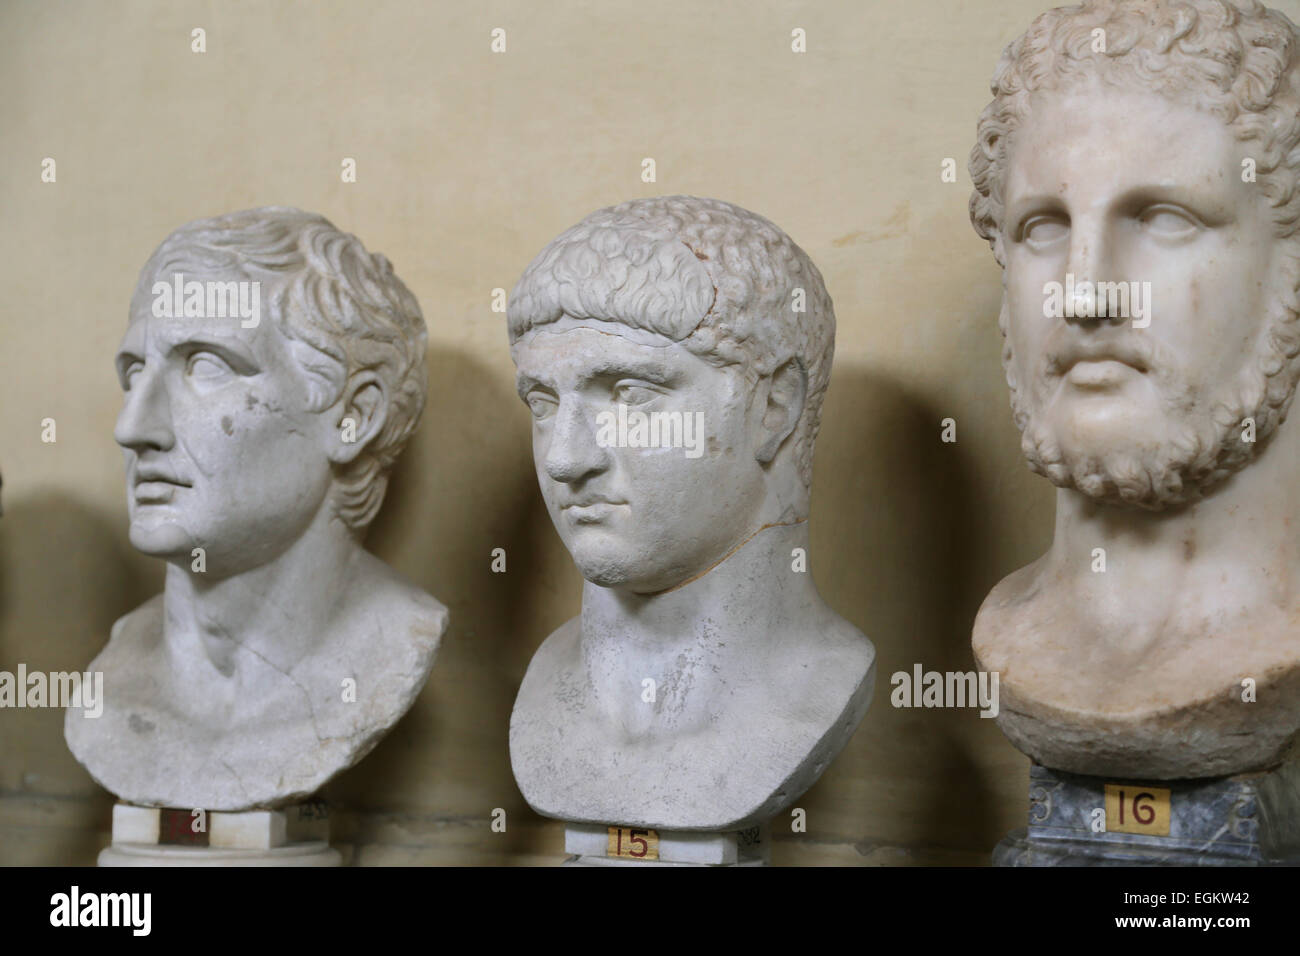 Male busts of Roman imperial era. Vatican Museums. Chiaramonti. Stock Photo